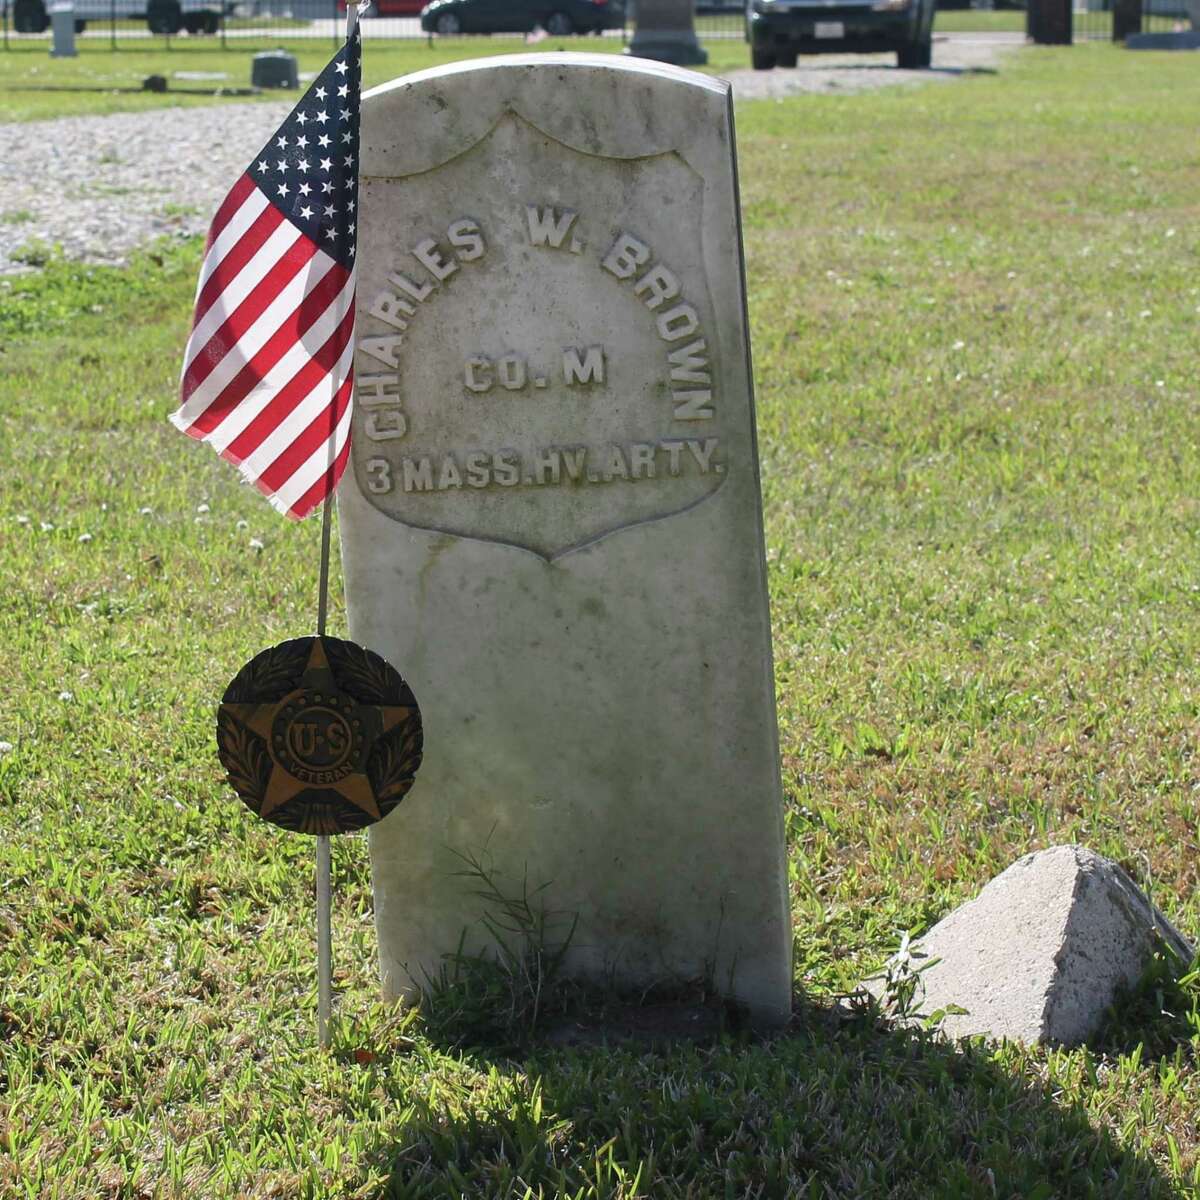 The grave of Charles W. Brown, one of many veterans interred in Humble Cemetery is marked with a commemorative medallion and an American flag.